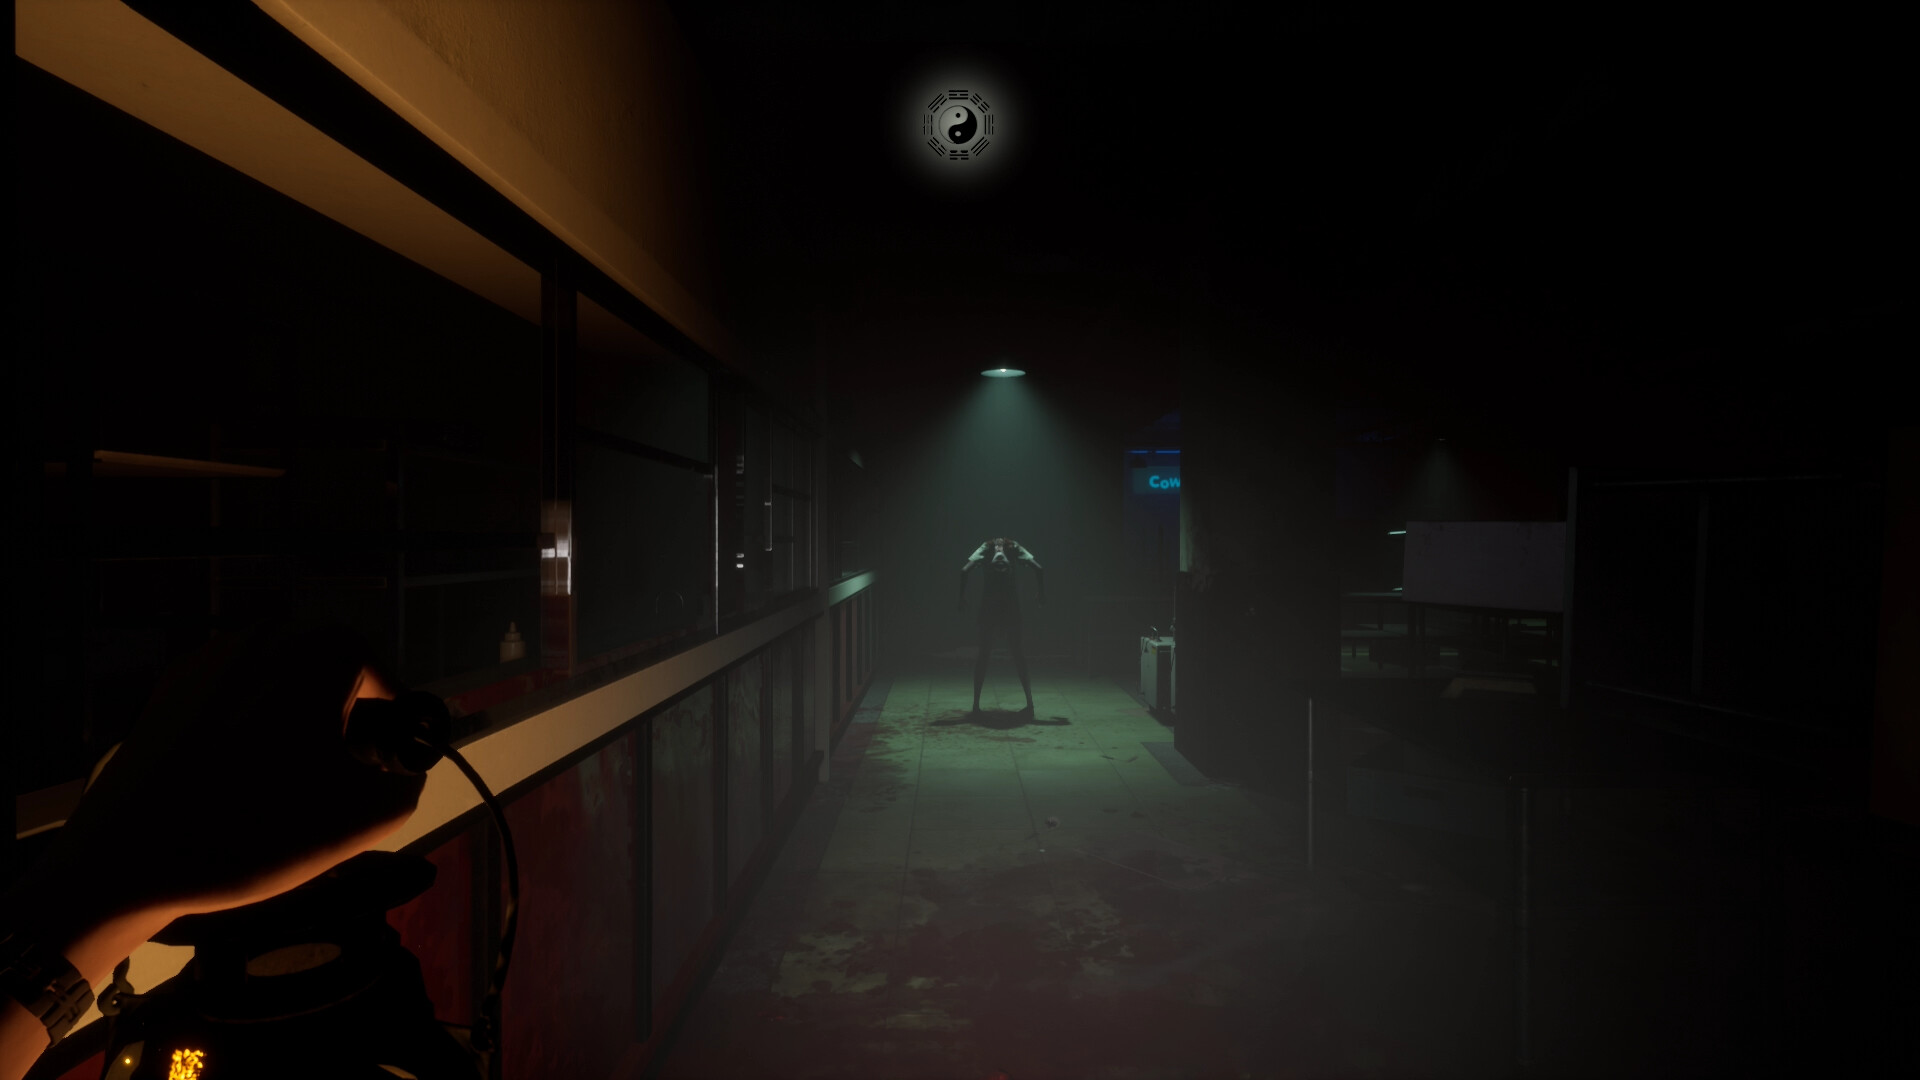 A screenshot from The Bridge Curse 2: The Extraction